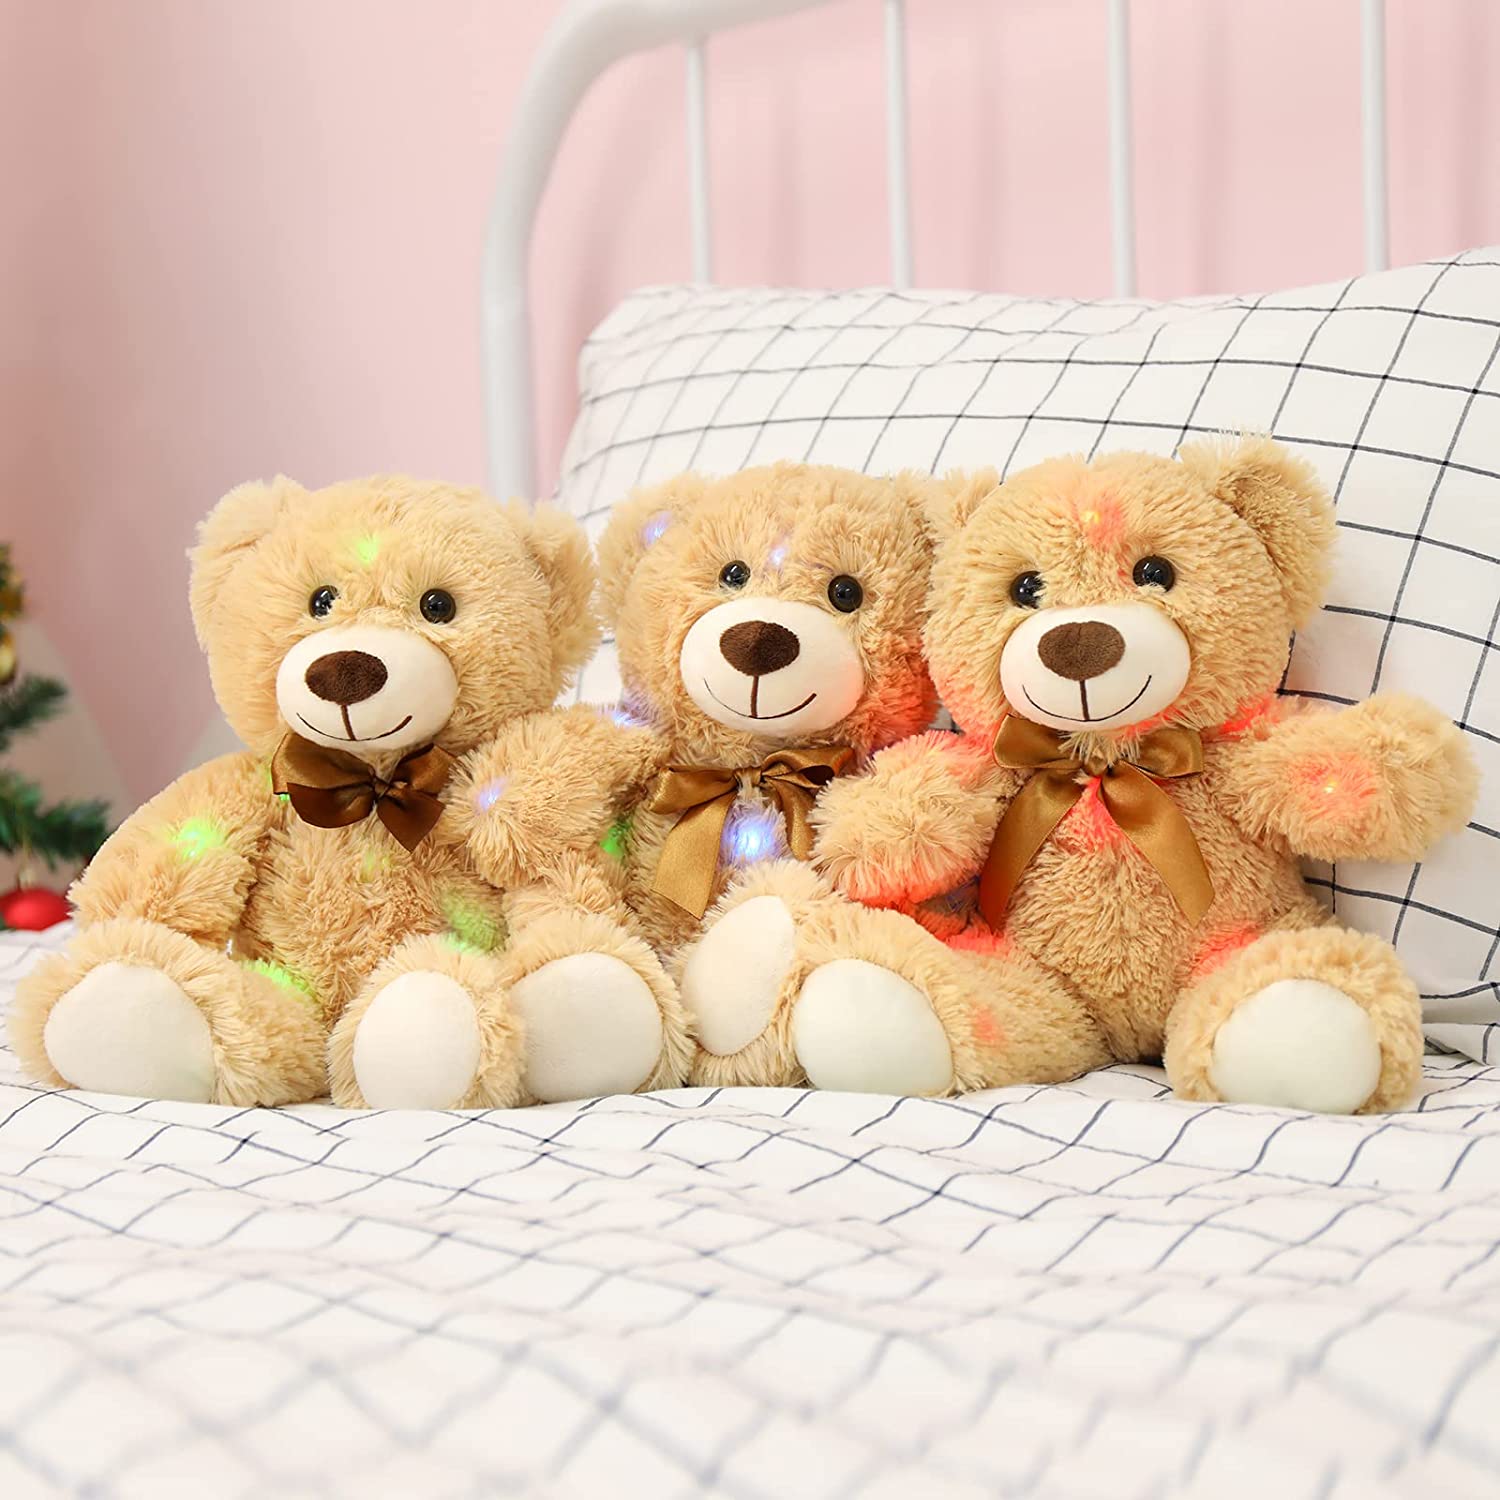 3-Pack Light Up Teddy Bears, Light Brown, 13.8 Inches